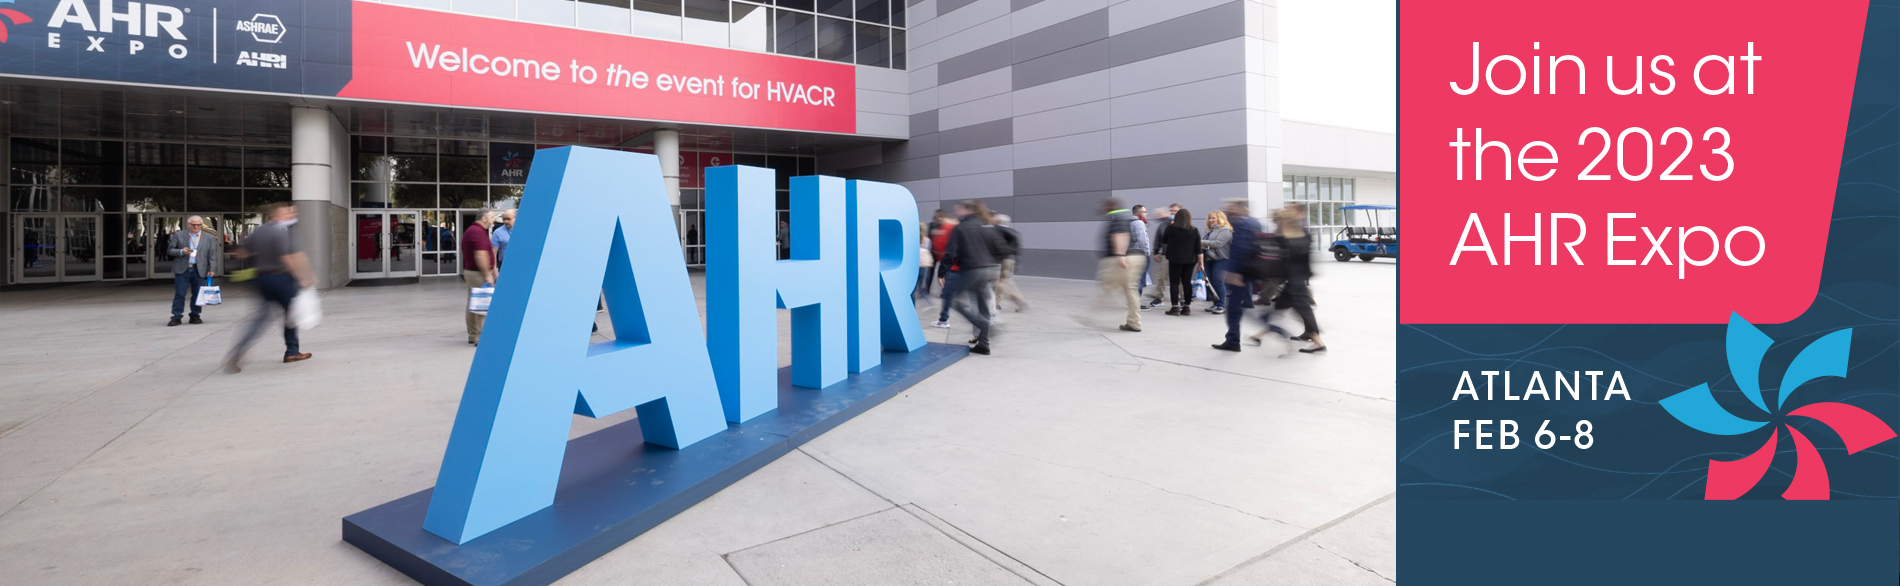 Busy entrance to AHR tradeshow with AHR logo in front